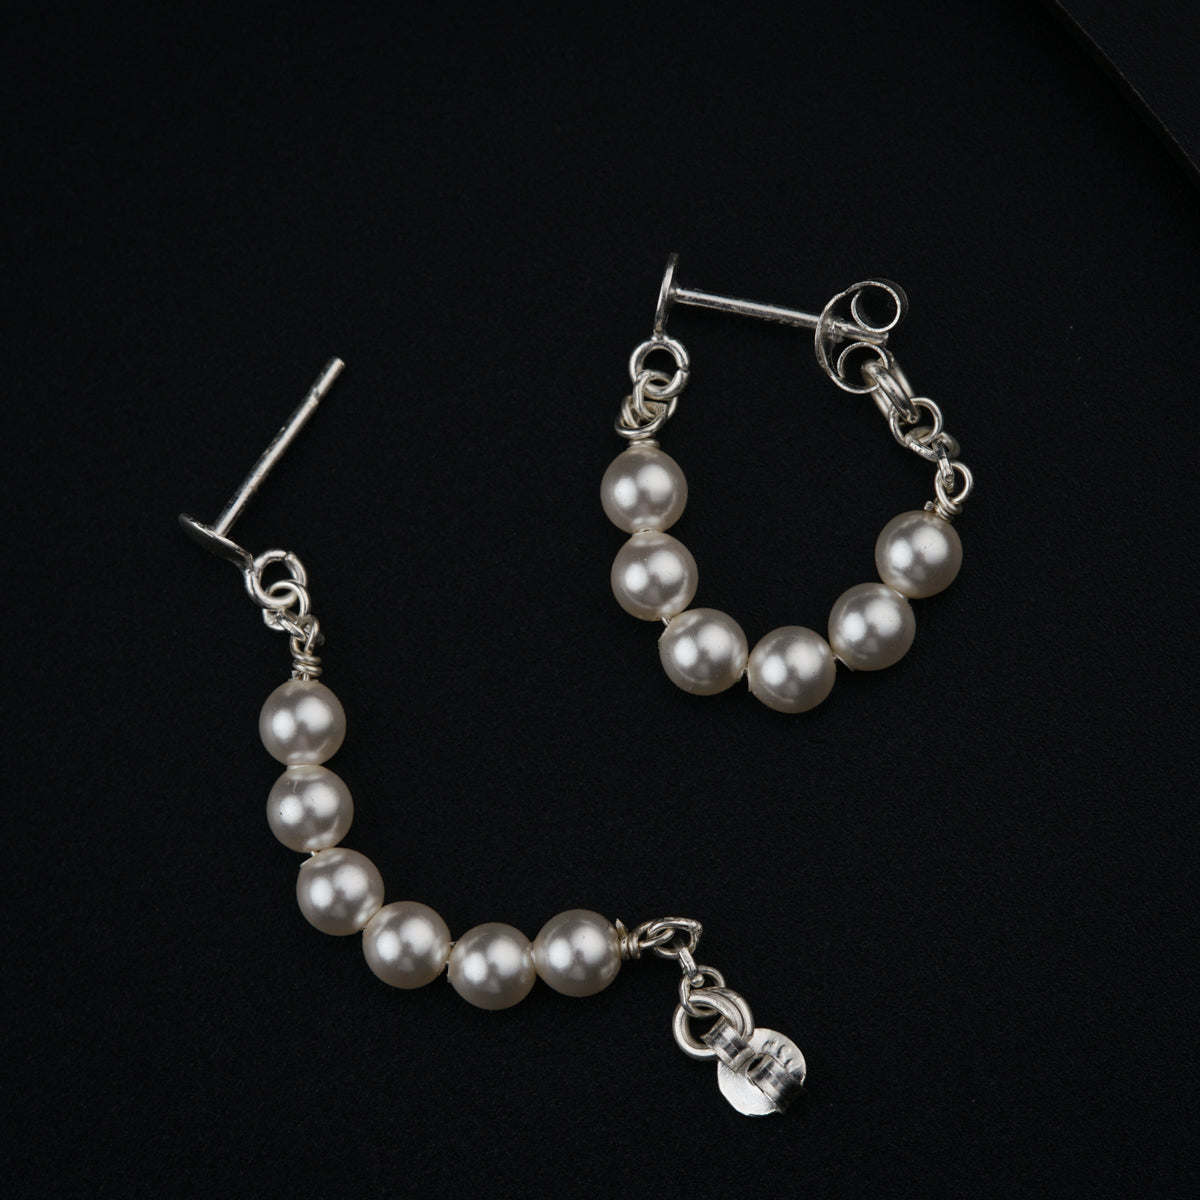 Sea-Themed Dangle Earrings with Grey and White Pearls - Sea Wonders | NOVICA